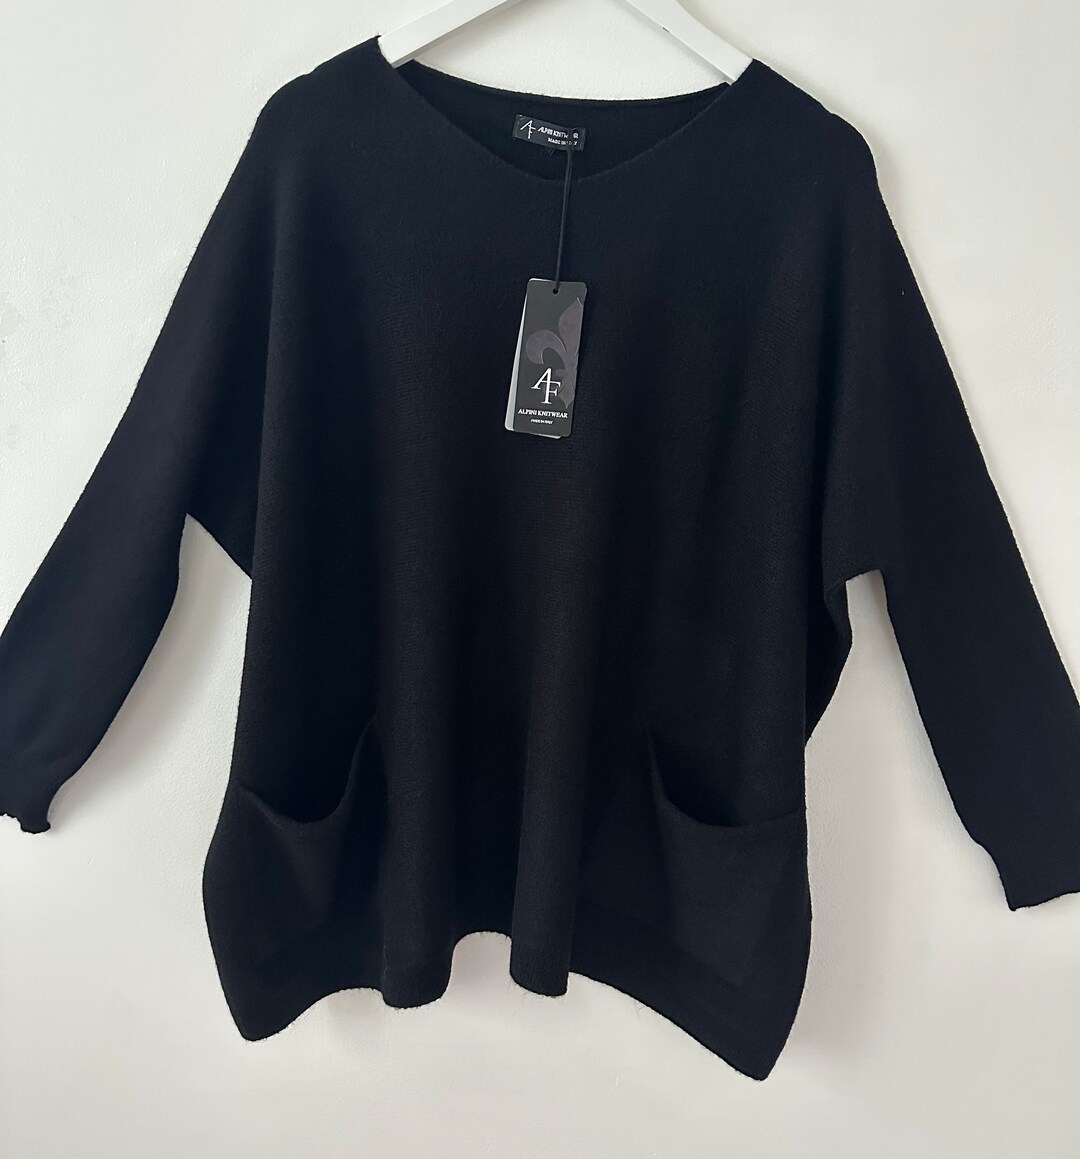 New Made in Italy Black Quirky Oversized Loose Batwing Lagenlook ...